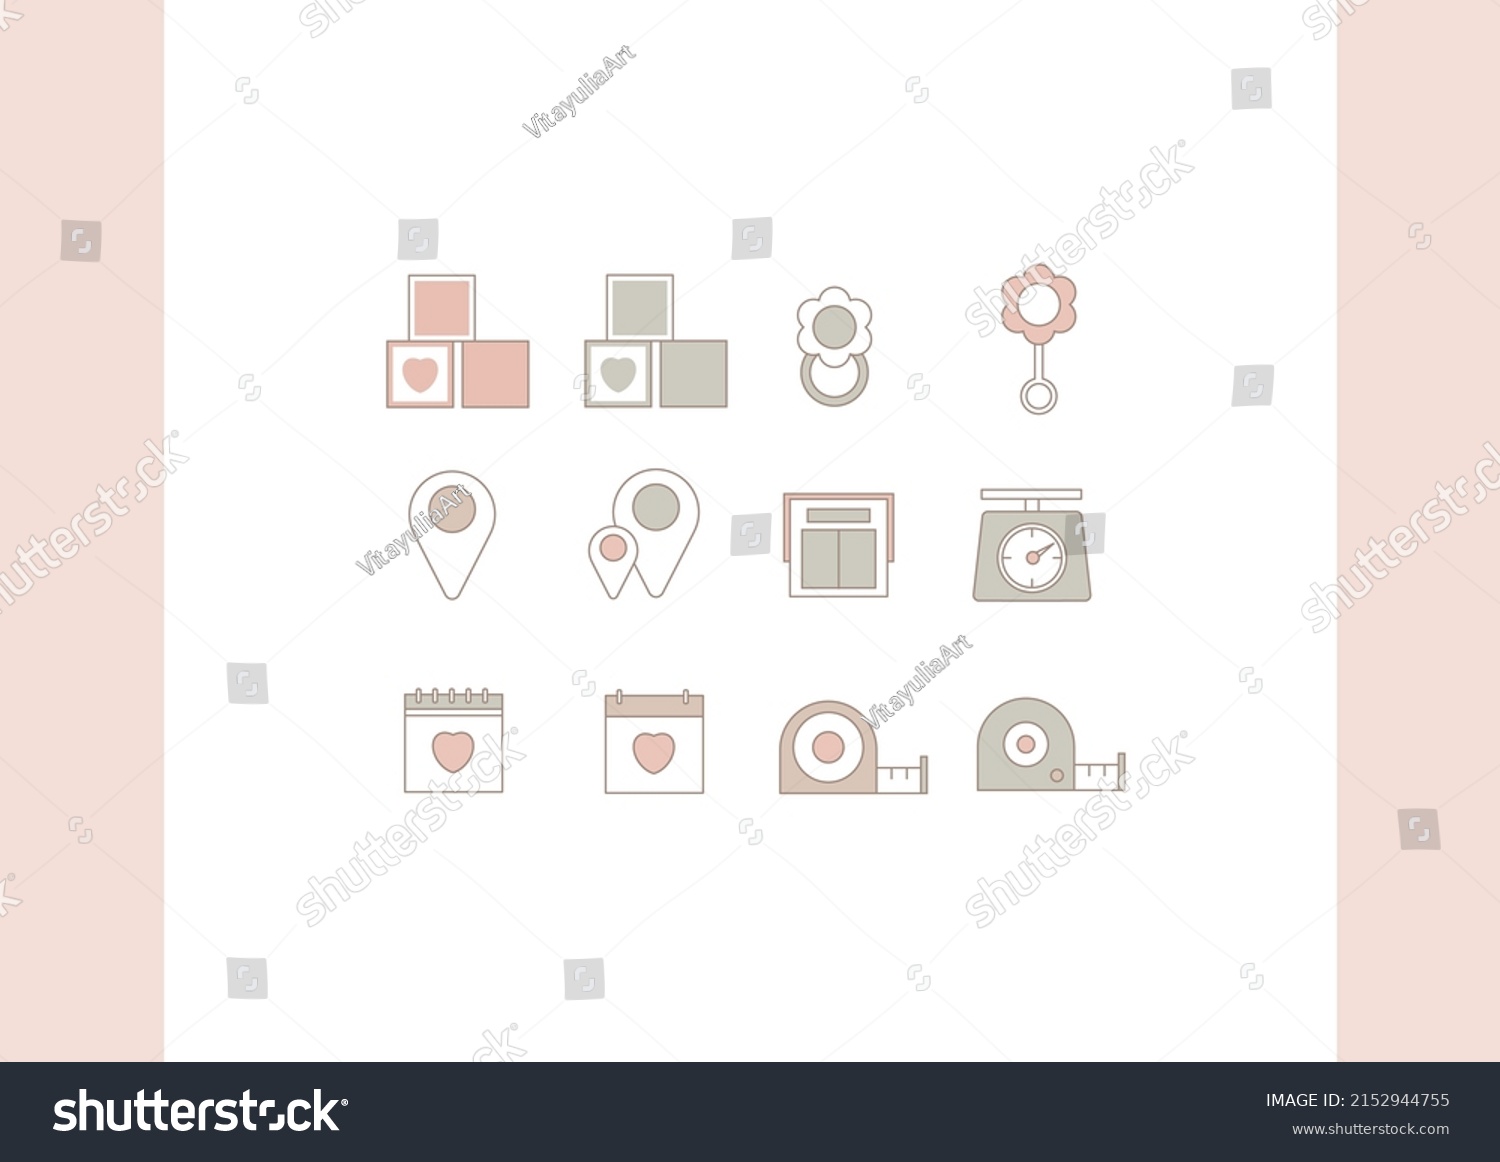 SVG of Birth Stats icons. Birth Announcement design. Age, weight, height icons svg